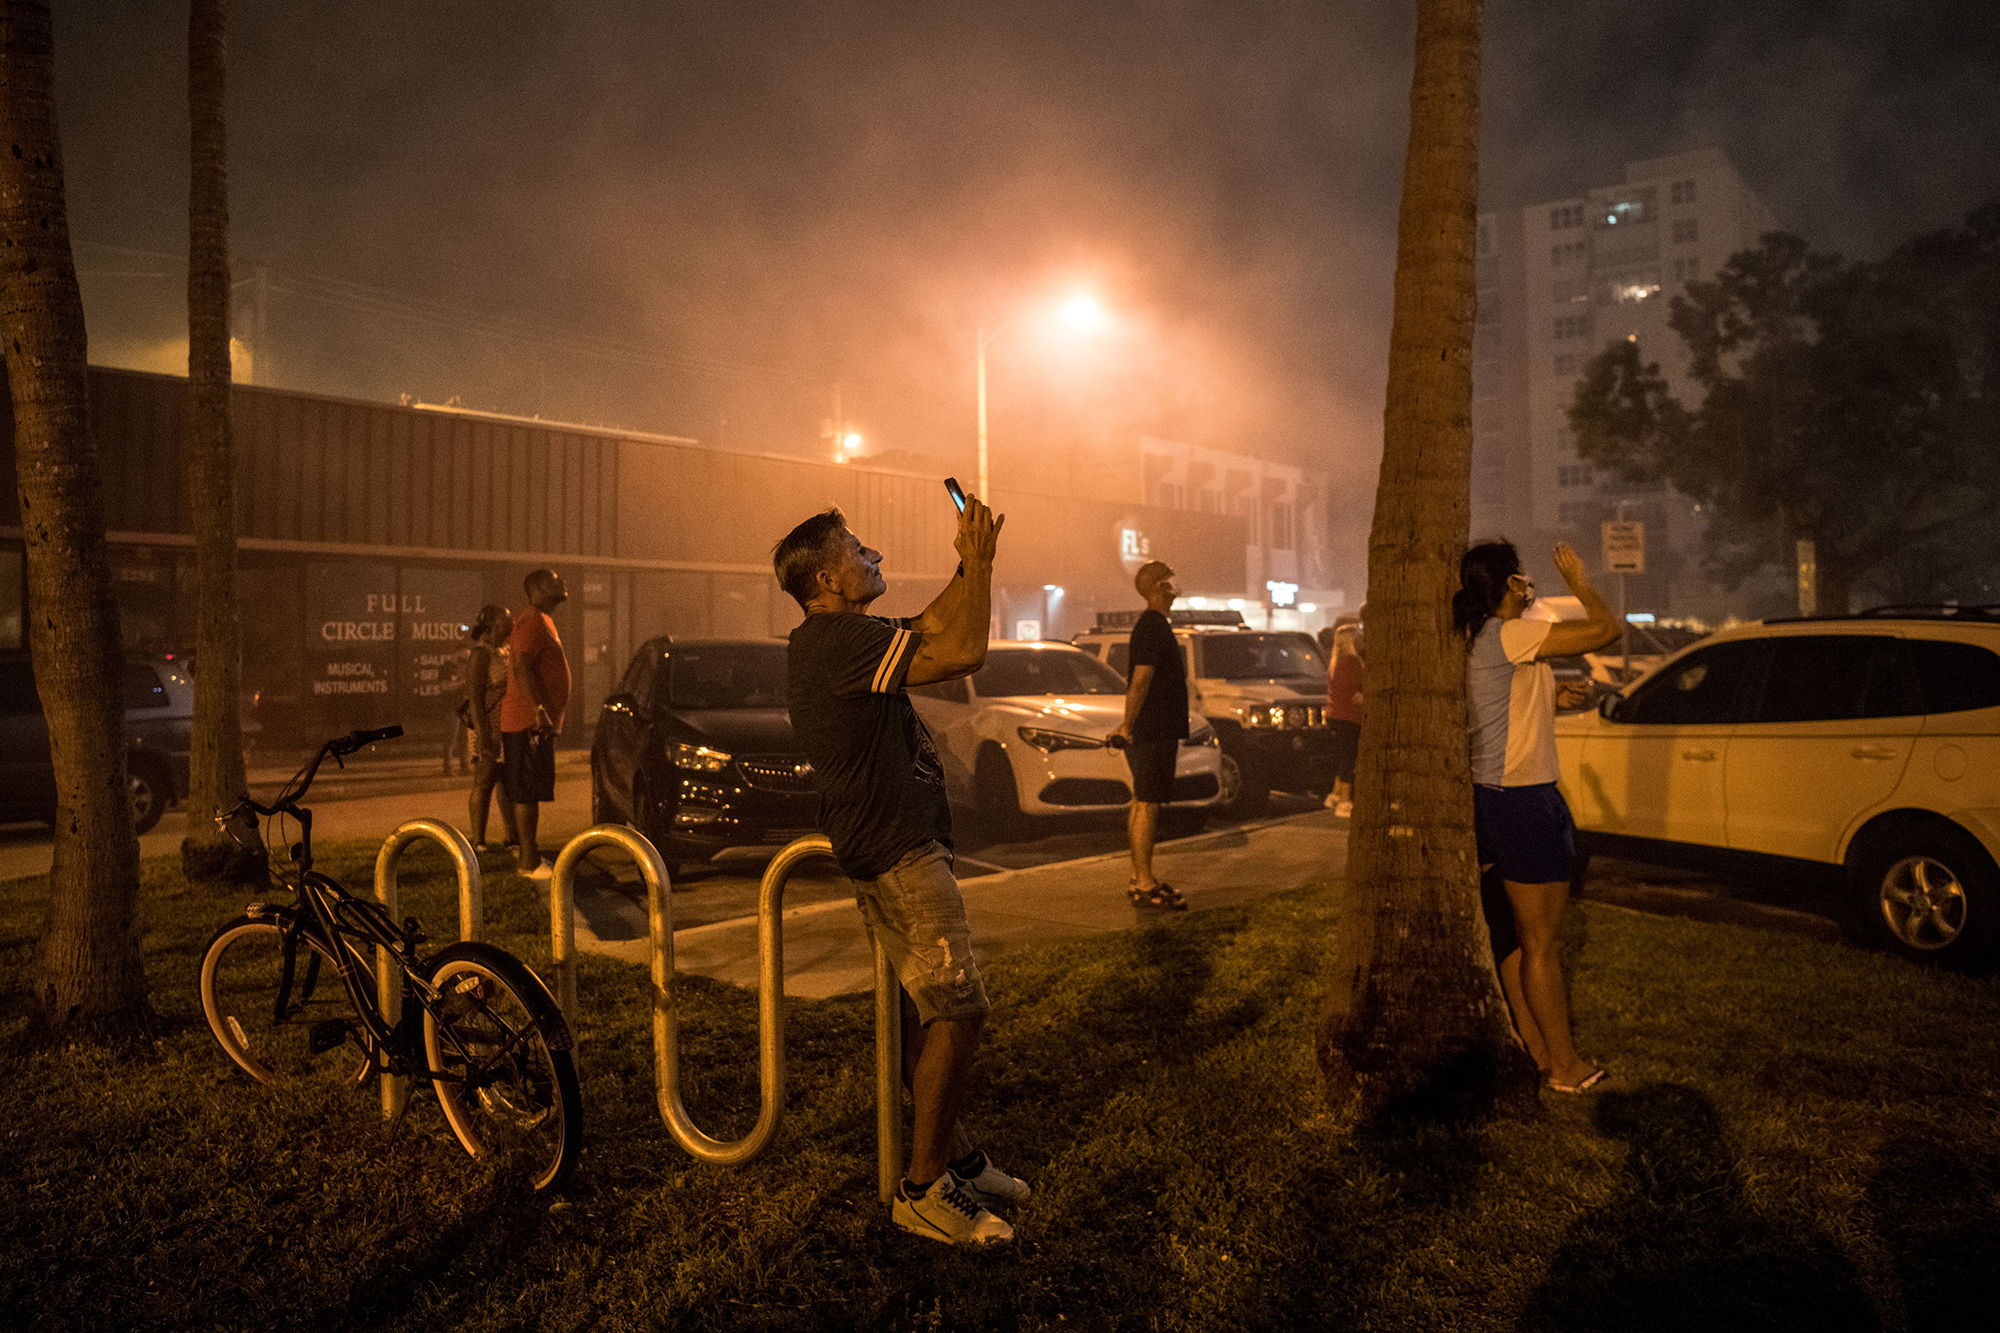 People gather on the street as they watch fireworks burst during Independence Day celebrations in Fort Lauderdale, Florida on July 4, 2020. Fort Lauderdale is the county seat of Broward County.